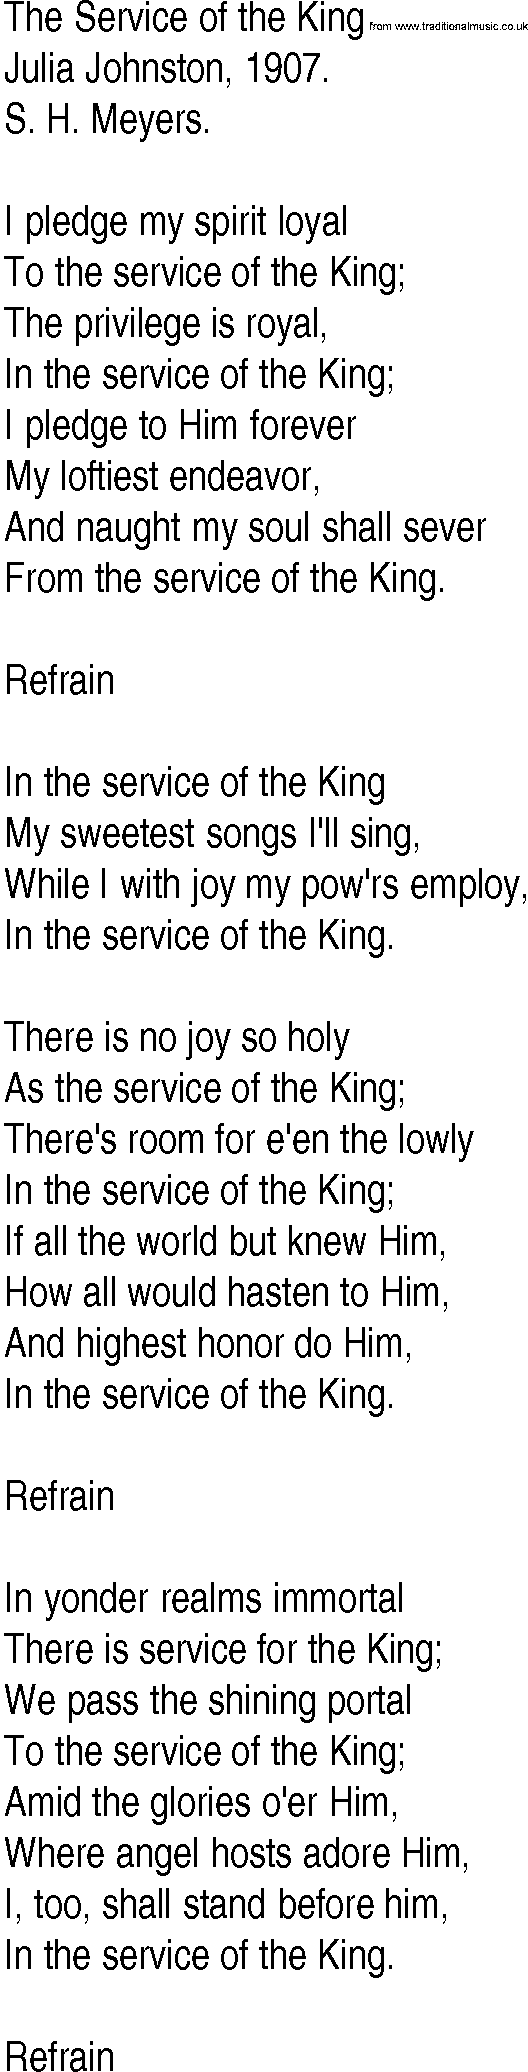 Hymn and Gospel Song: The Service of the King by Julia Johnston lyrics